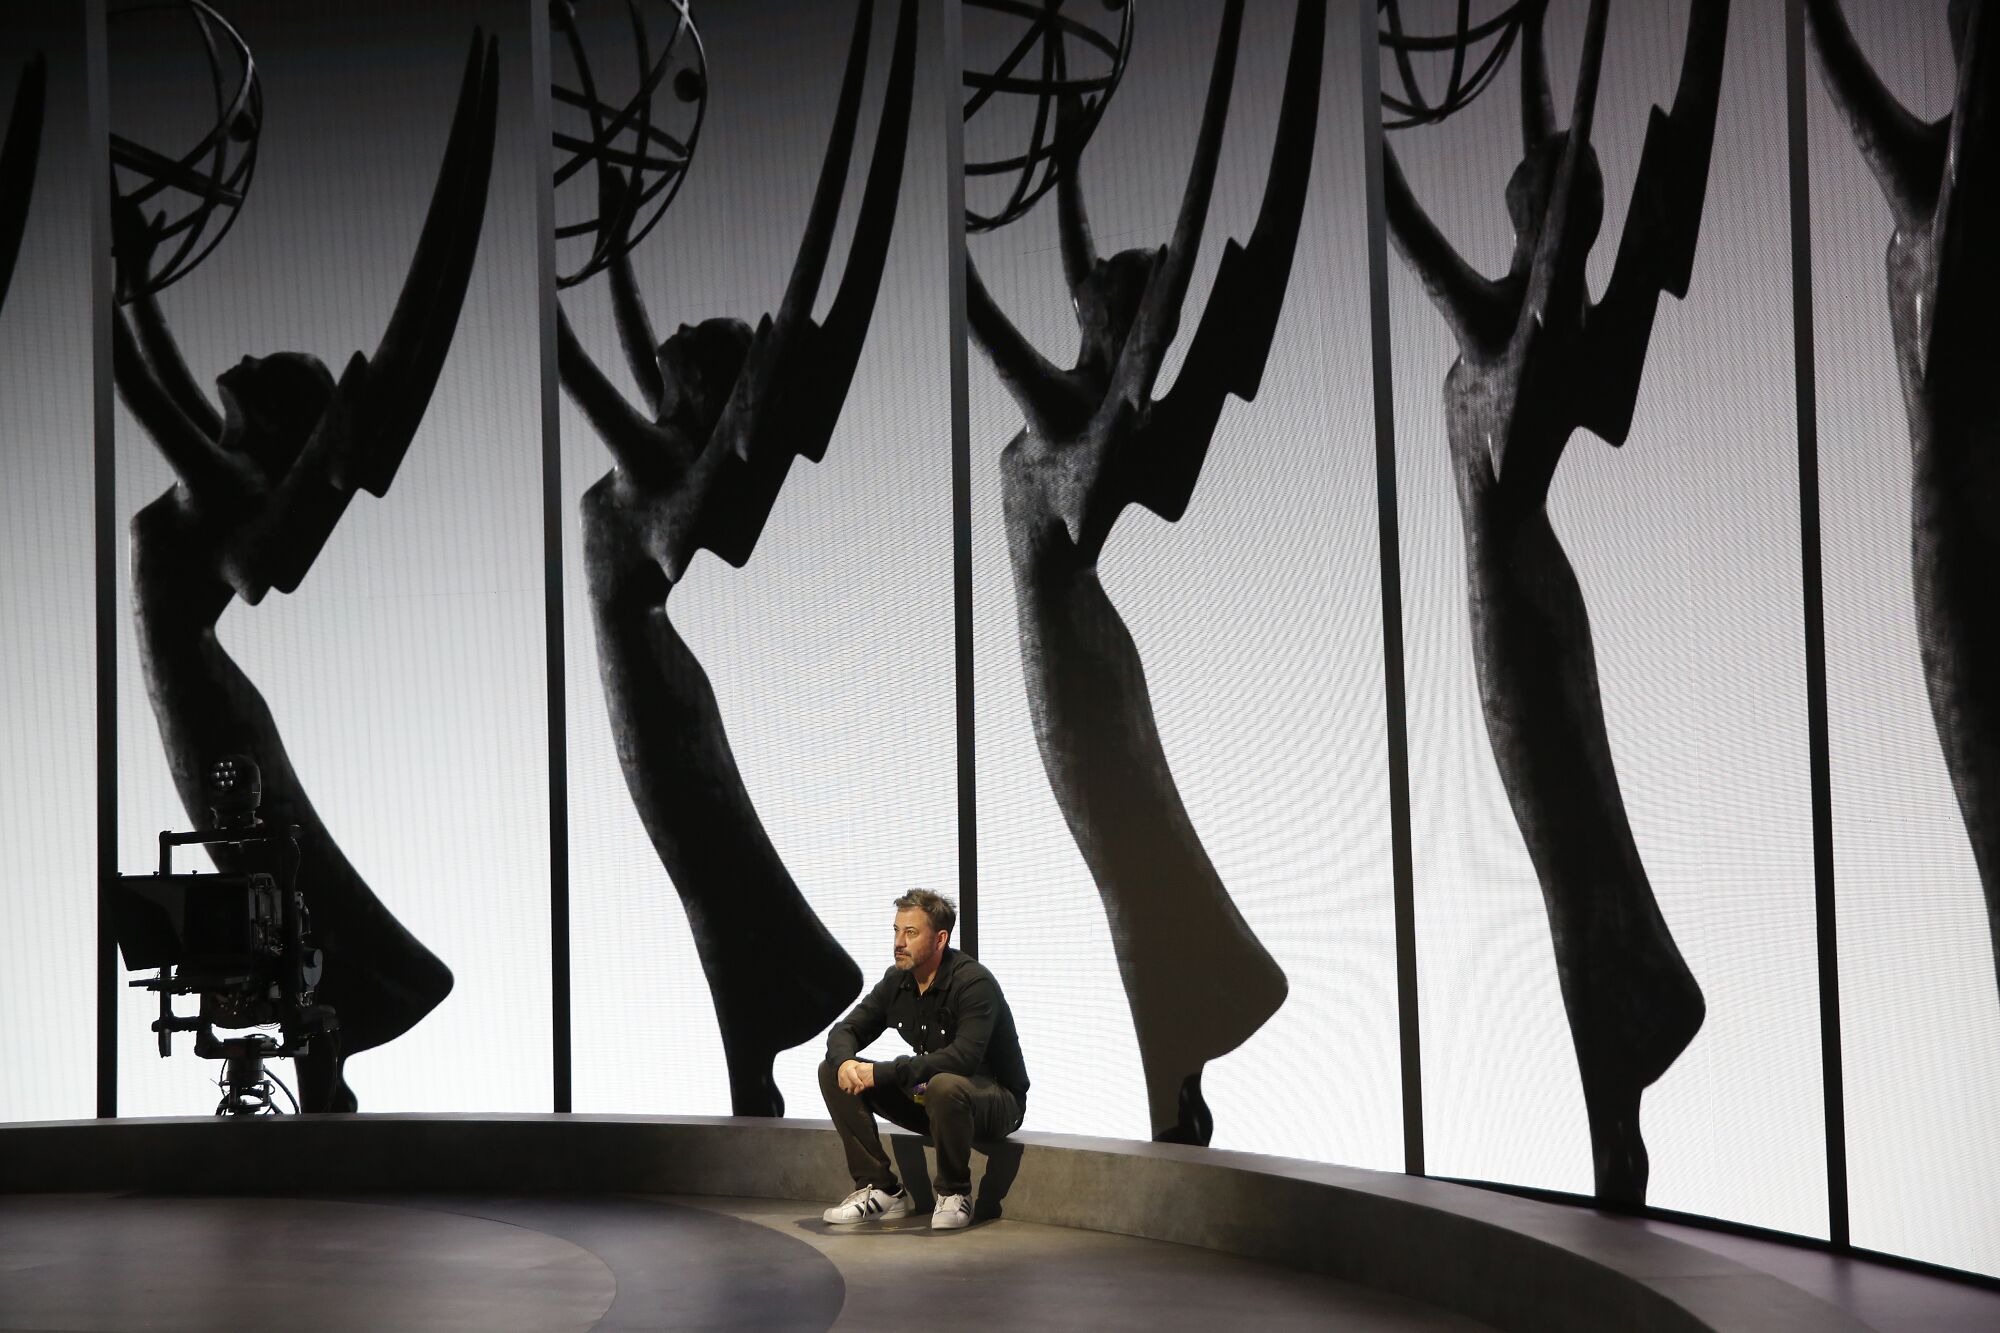  Emmy Host Jimmy Kimmel relaxes on the Emmy Awards stage.